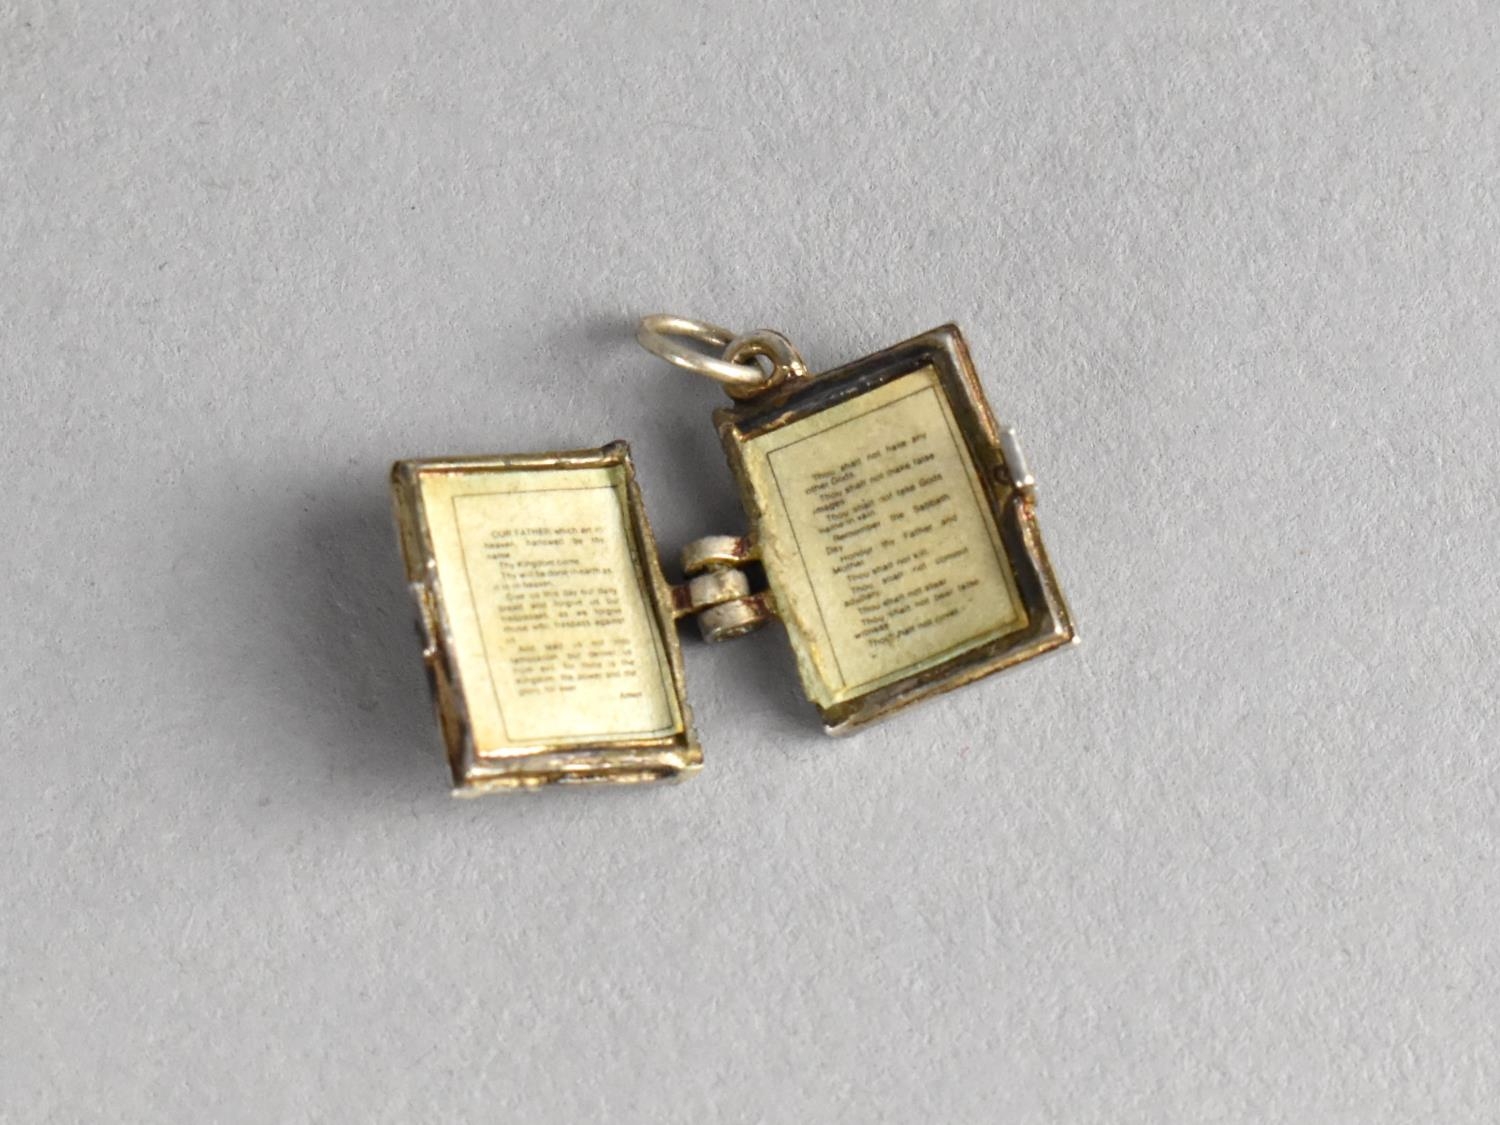 Two Silver Brooches and a Silver Bible Charm Inside Written Lords Prayer and the Ten Comandments, - Image 2 of 2